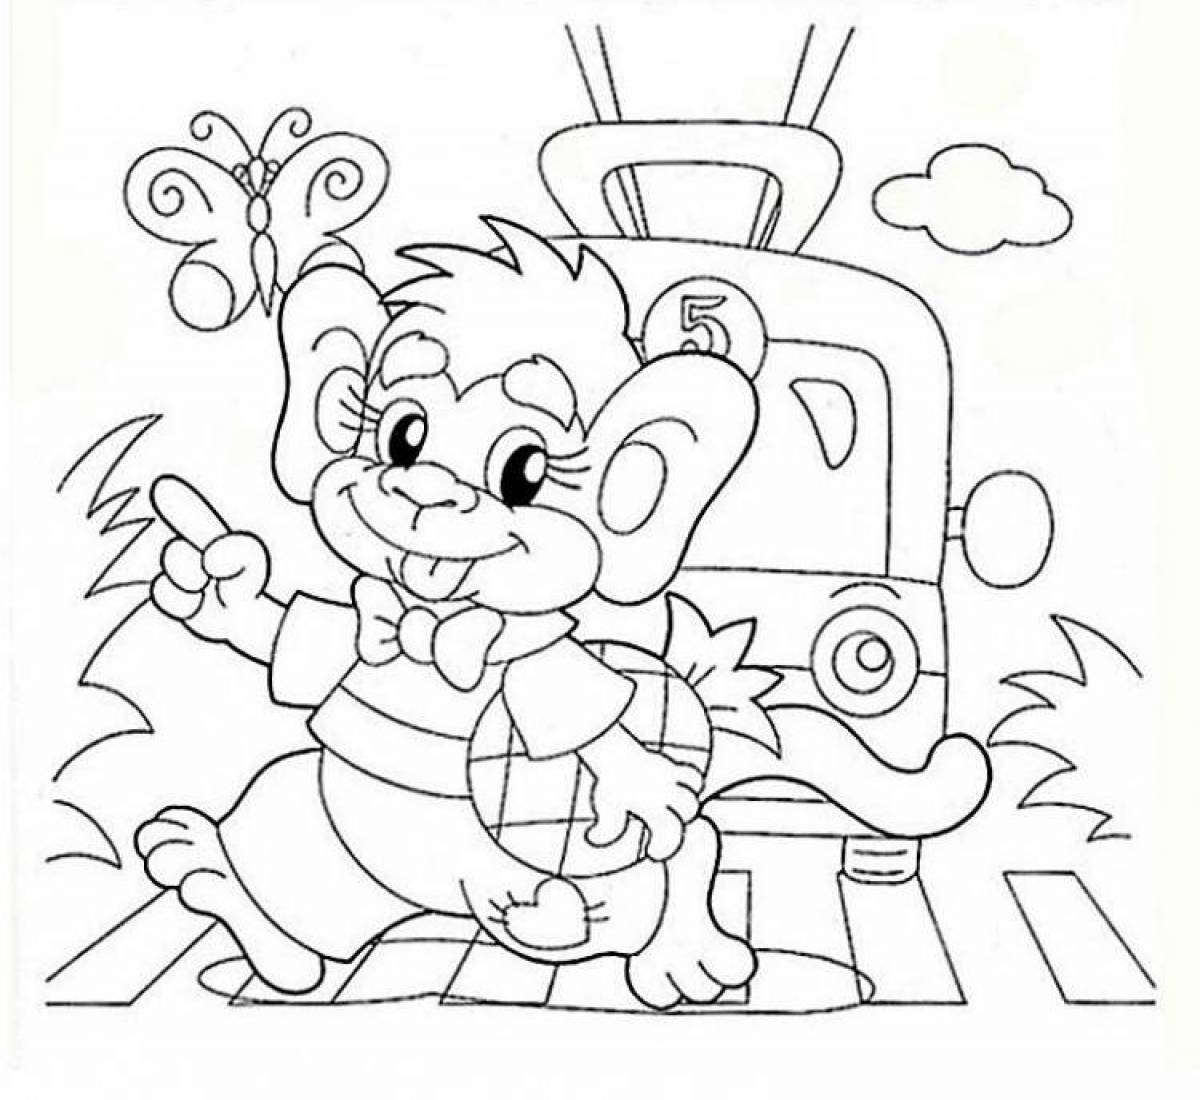 Attractive traffic rules coloring page